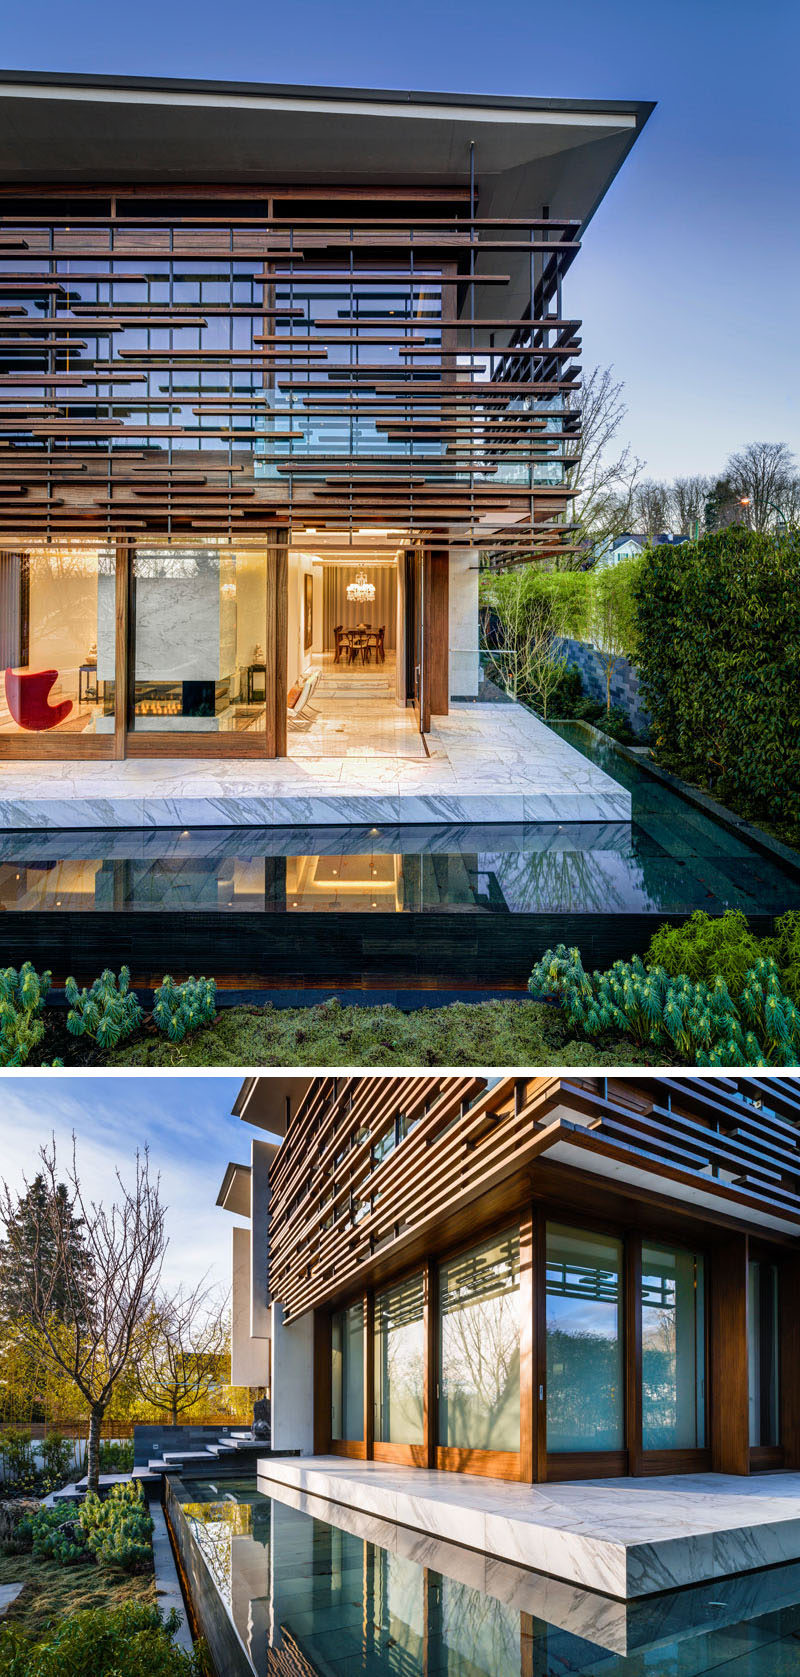 RUFproject have designed the renovation of the W38th Residence in Vancouver, Canada, that features exterior timber slats that wrap around the outside of the home. The timber slats provide shade and privacy to the large windows, and are mounted to a minimal steel frame that's suspended from the roof.